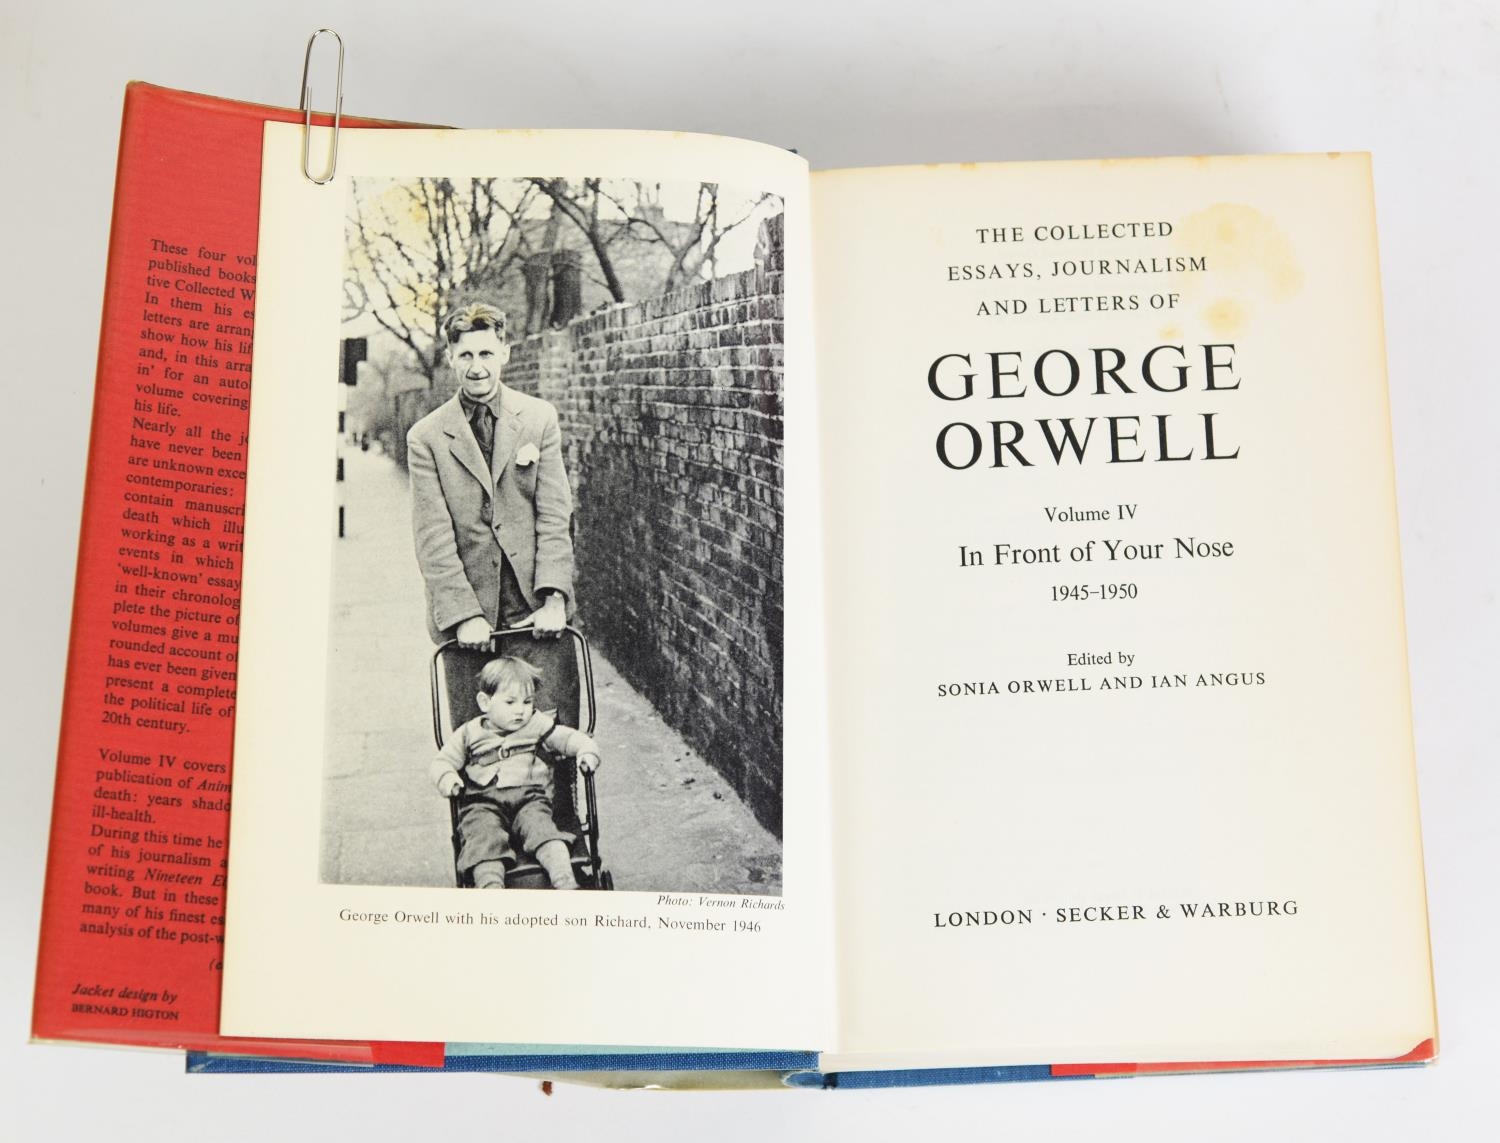 Sonia Orwell & Ian Angus - The Collected Essays, Journalism and Letters of George Orwell, 4 Vol, pub - Image 4 of 5